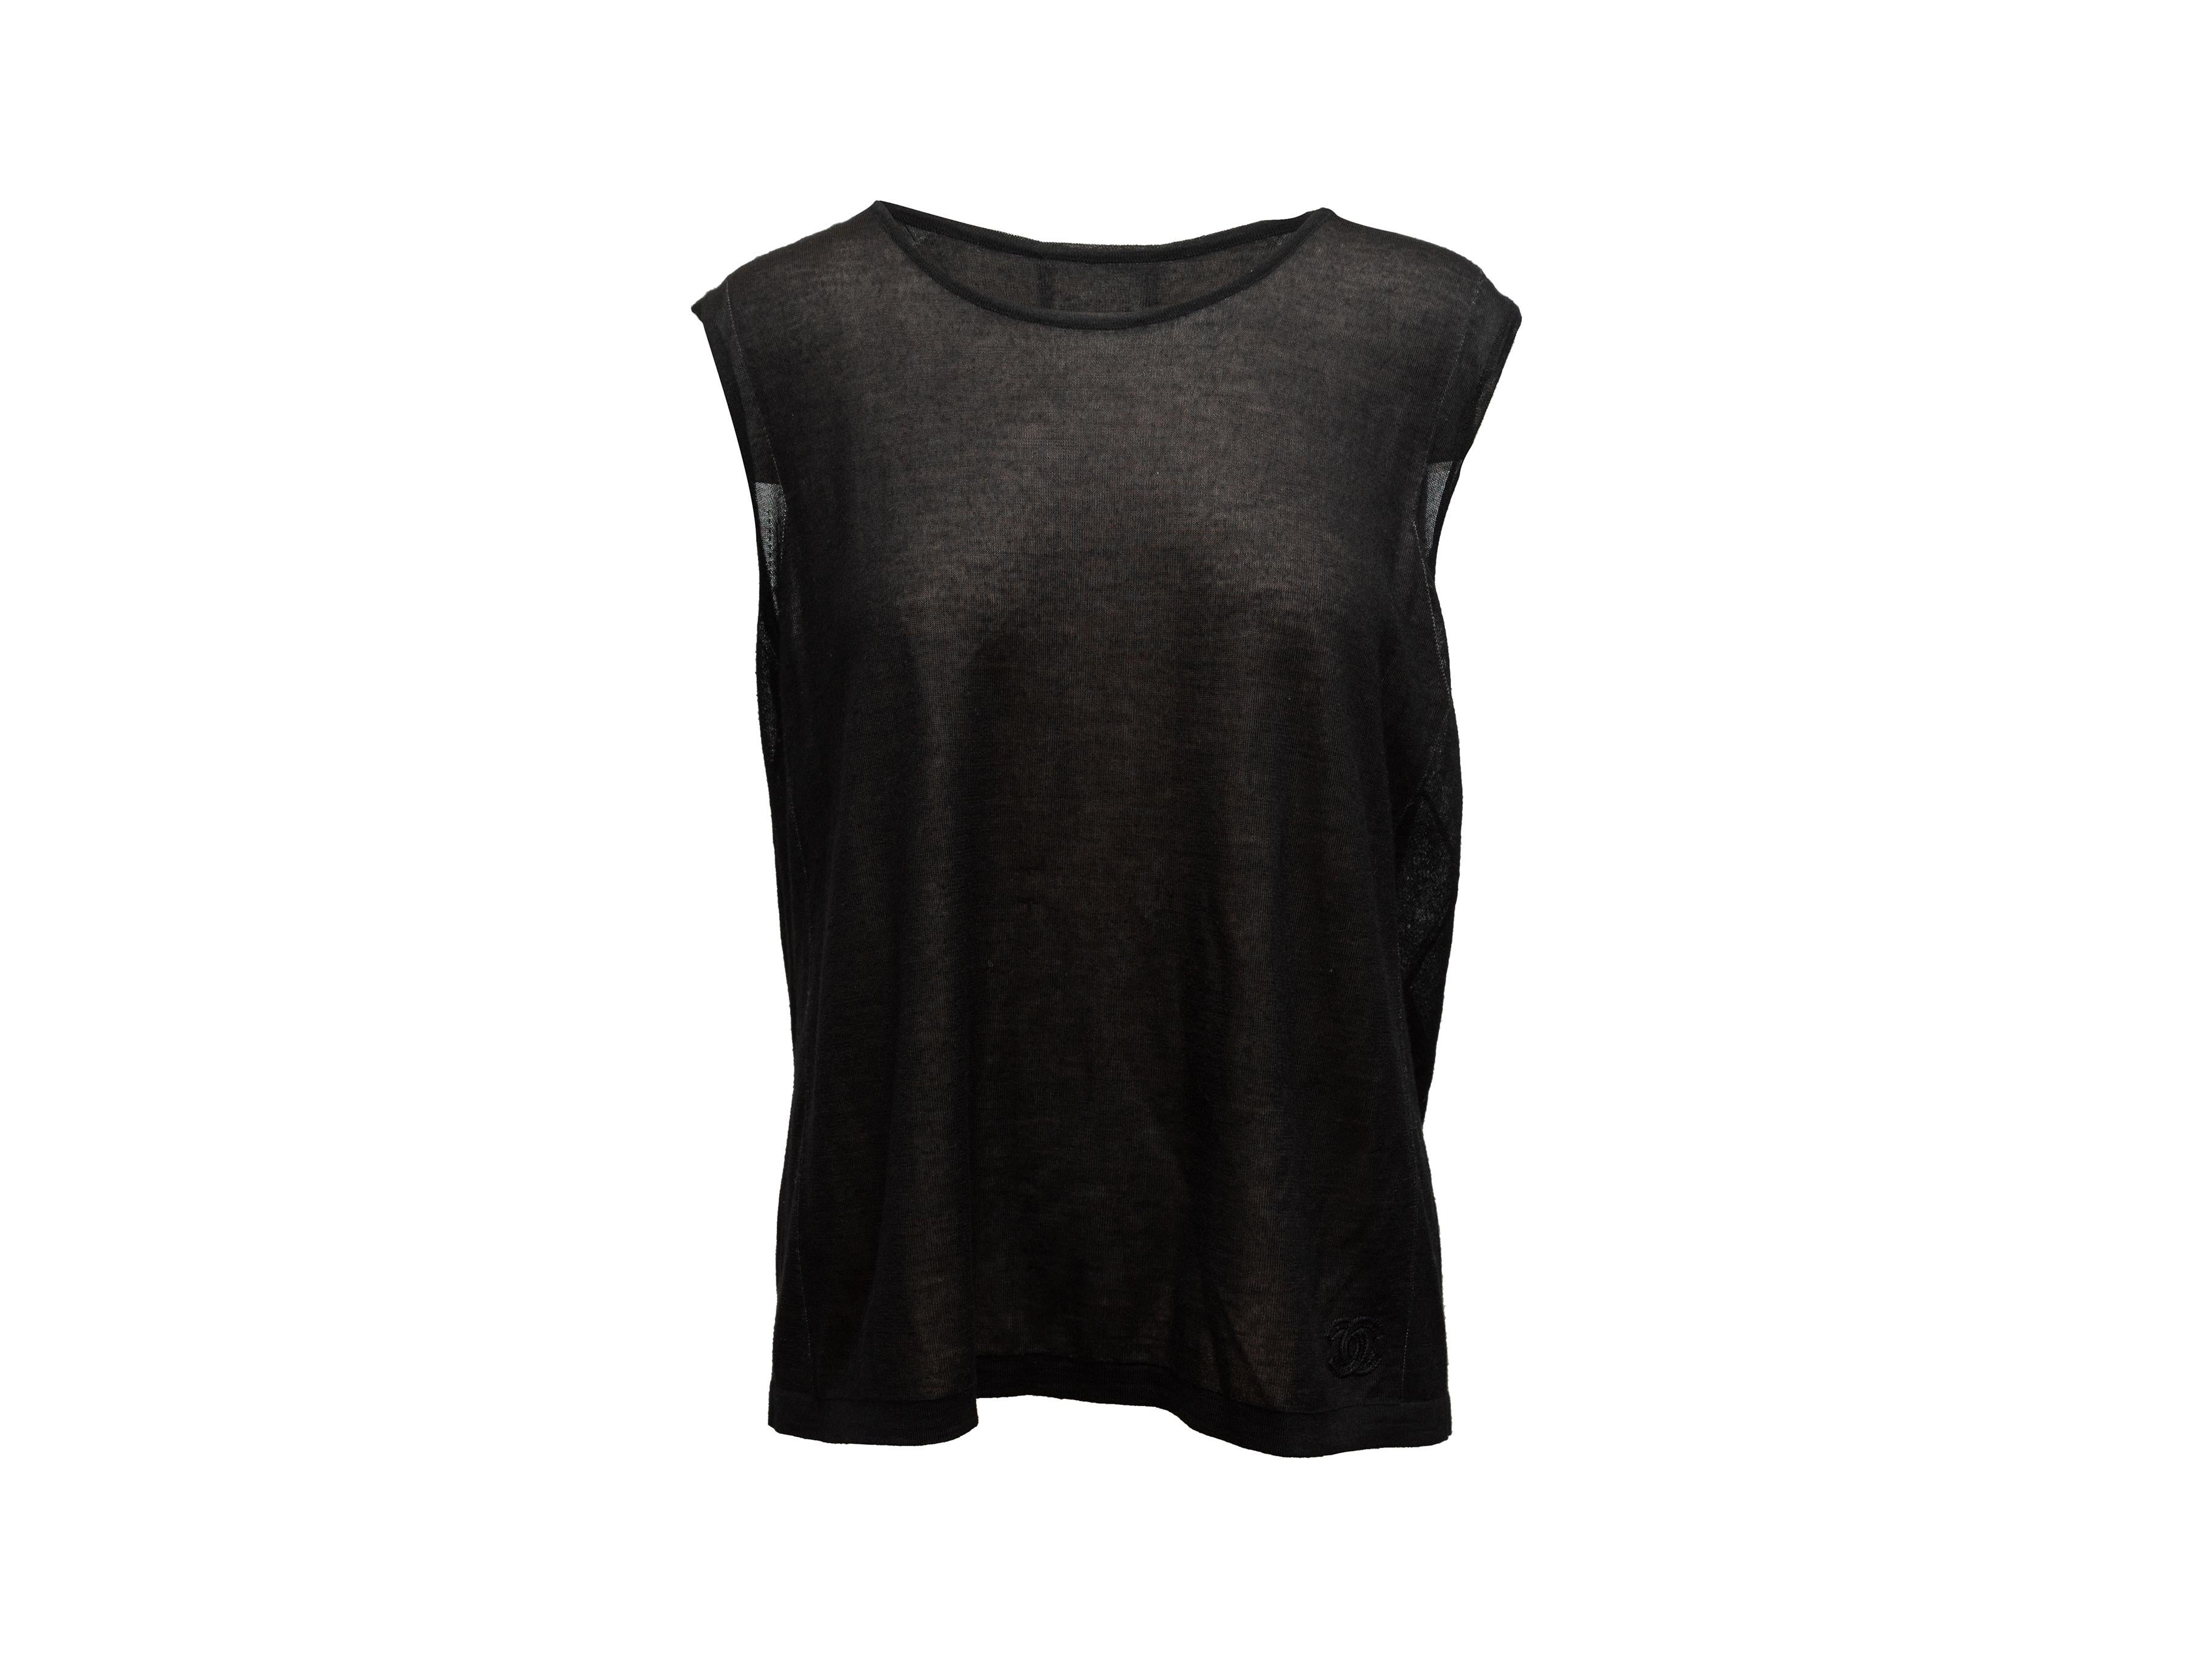 Product details: Black sleeveless top by Chanel. Crew neck. CC logo intarsia pattern at chest. Designer size 46. 27